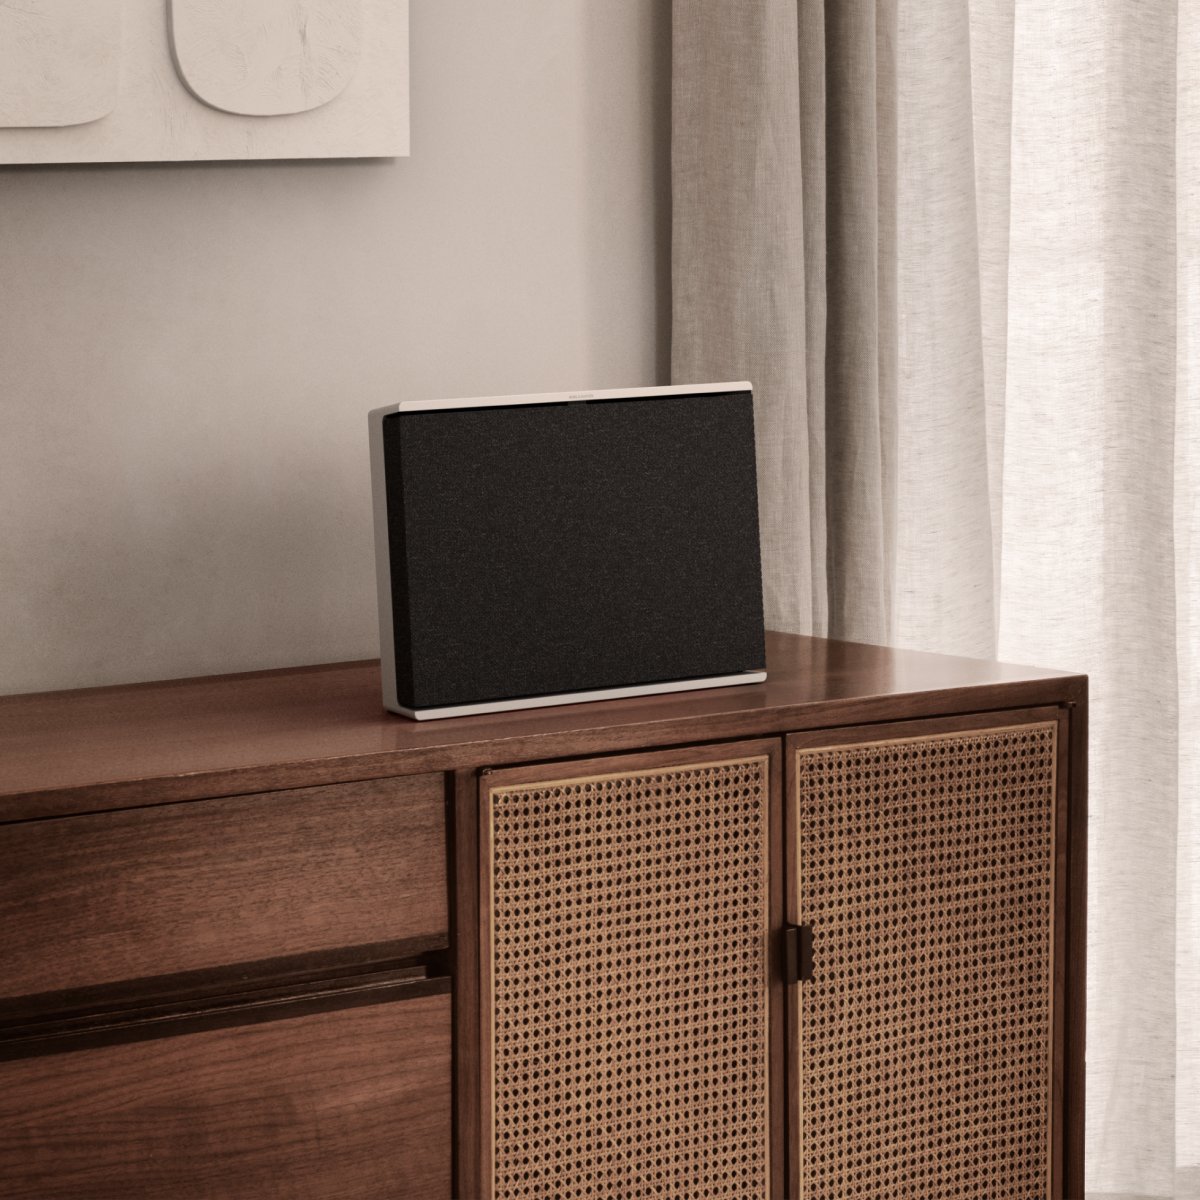 Introducing Beosound Level, a wifi home speaker is our promise of designing future-proof products built to last. You go, Level follows. 

#BangOlufsen #WifiSpeaker #Portable